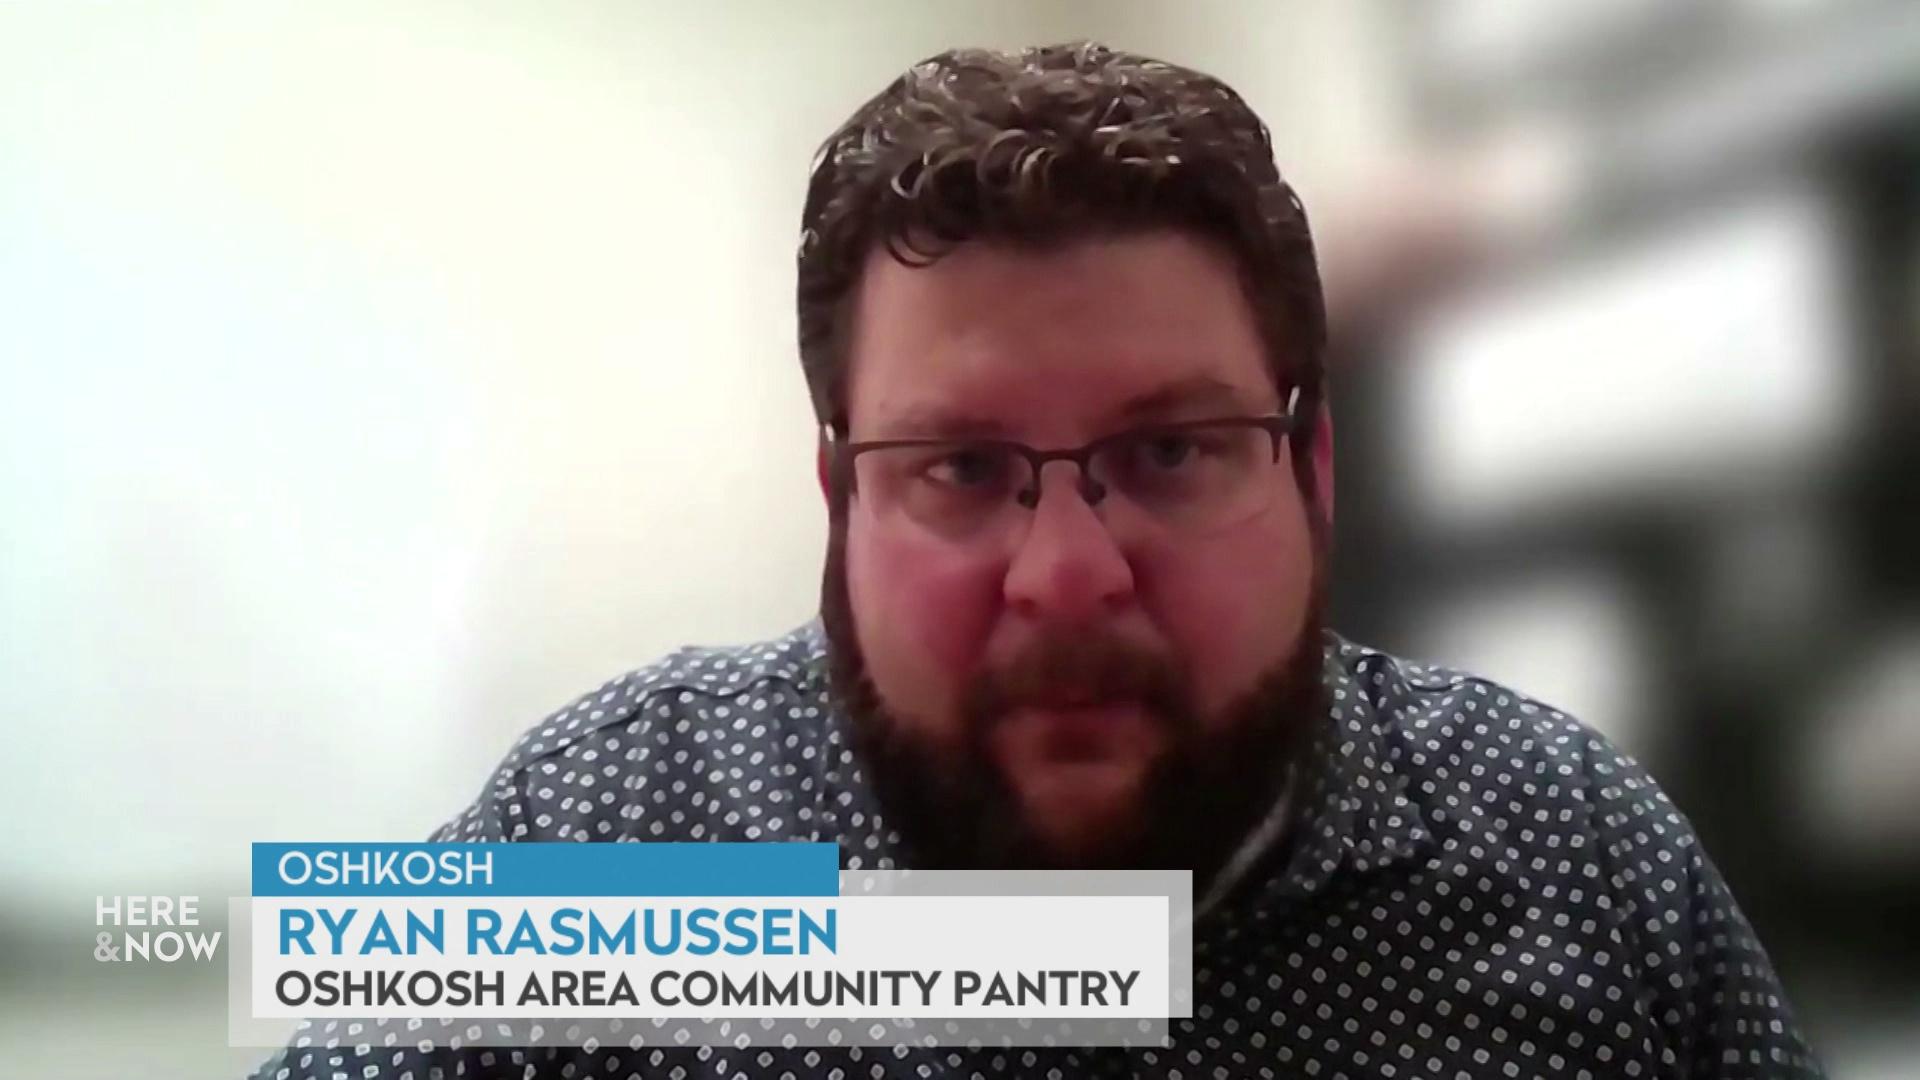 A still image from a video shows Ryan Rasmussen seated in front of a blurred background with a graphic at bottom reading 'Oshkosh,' 'Ryan Rasmussen' and 'Oshkosh Area Community Pantry.'